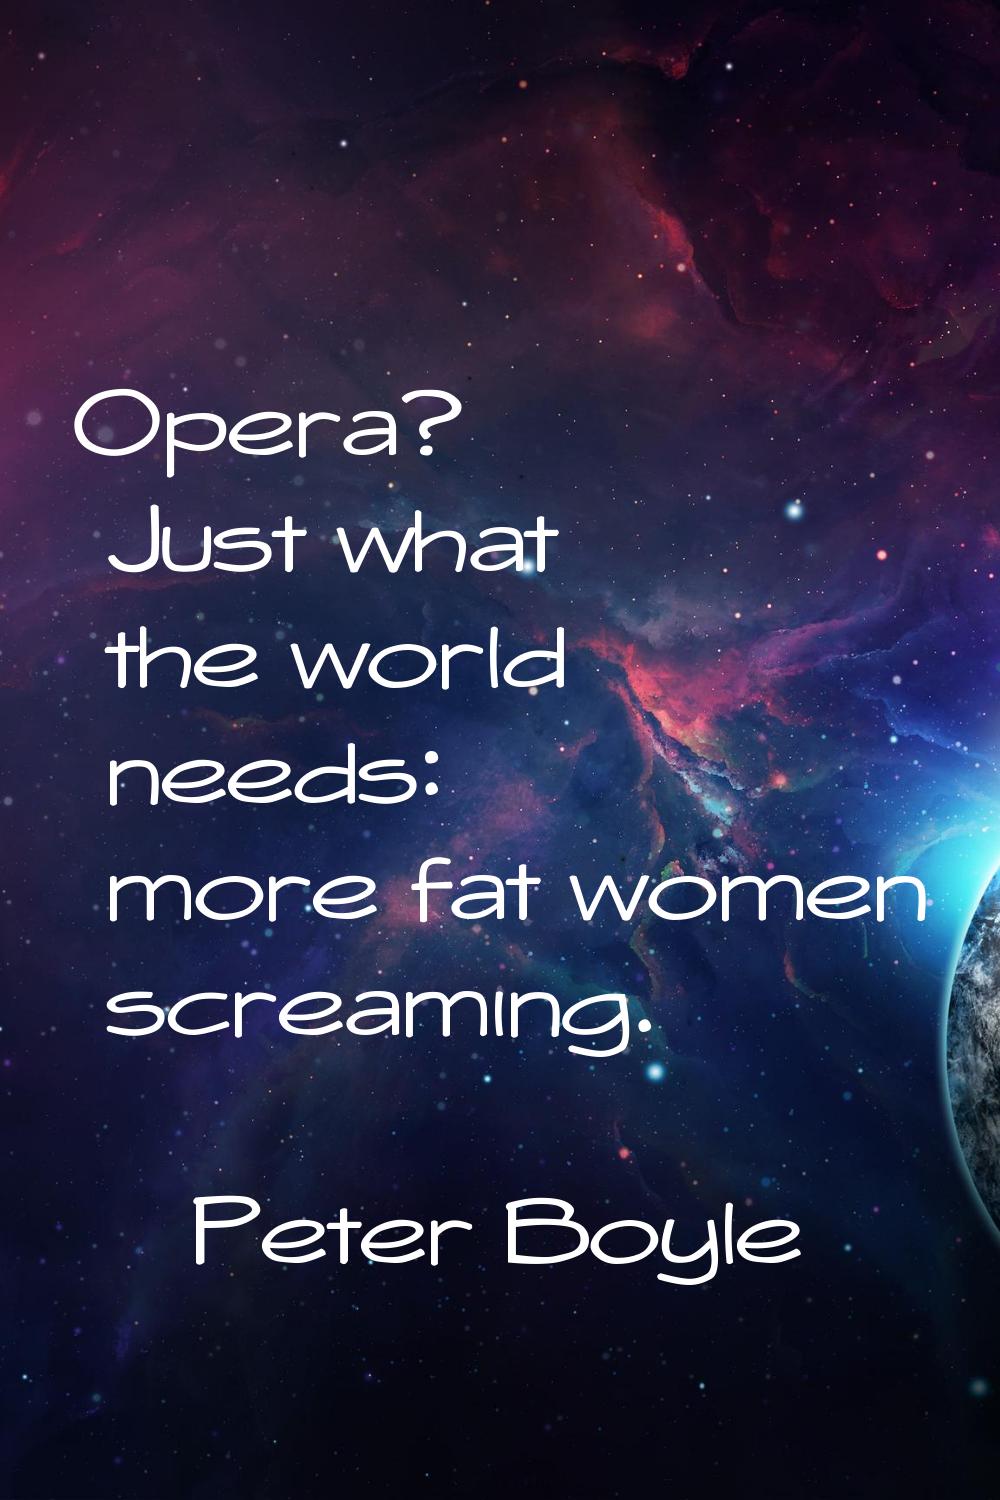 Opera? Just what the world needs: more fat women screaming.